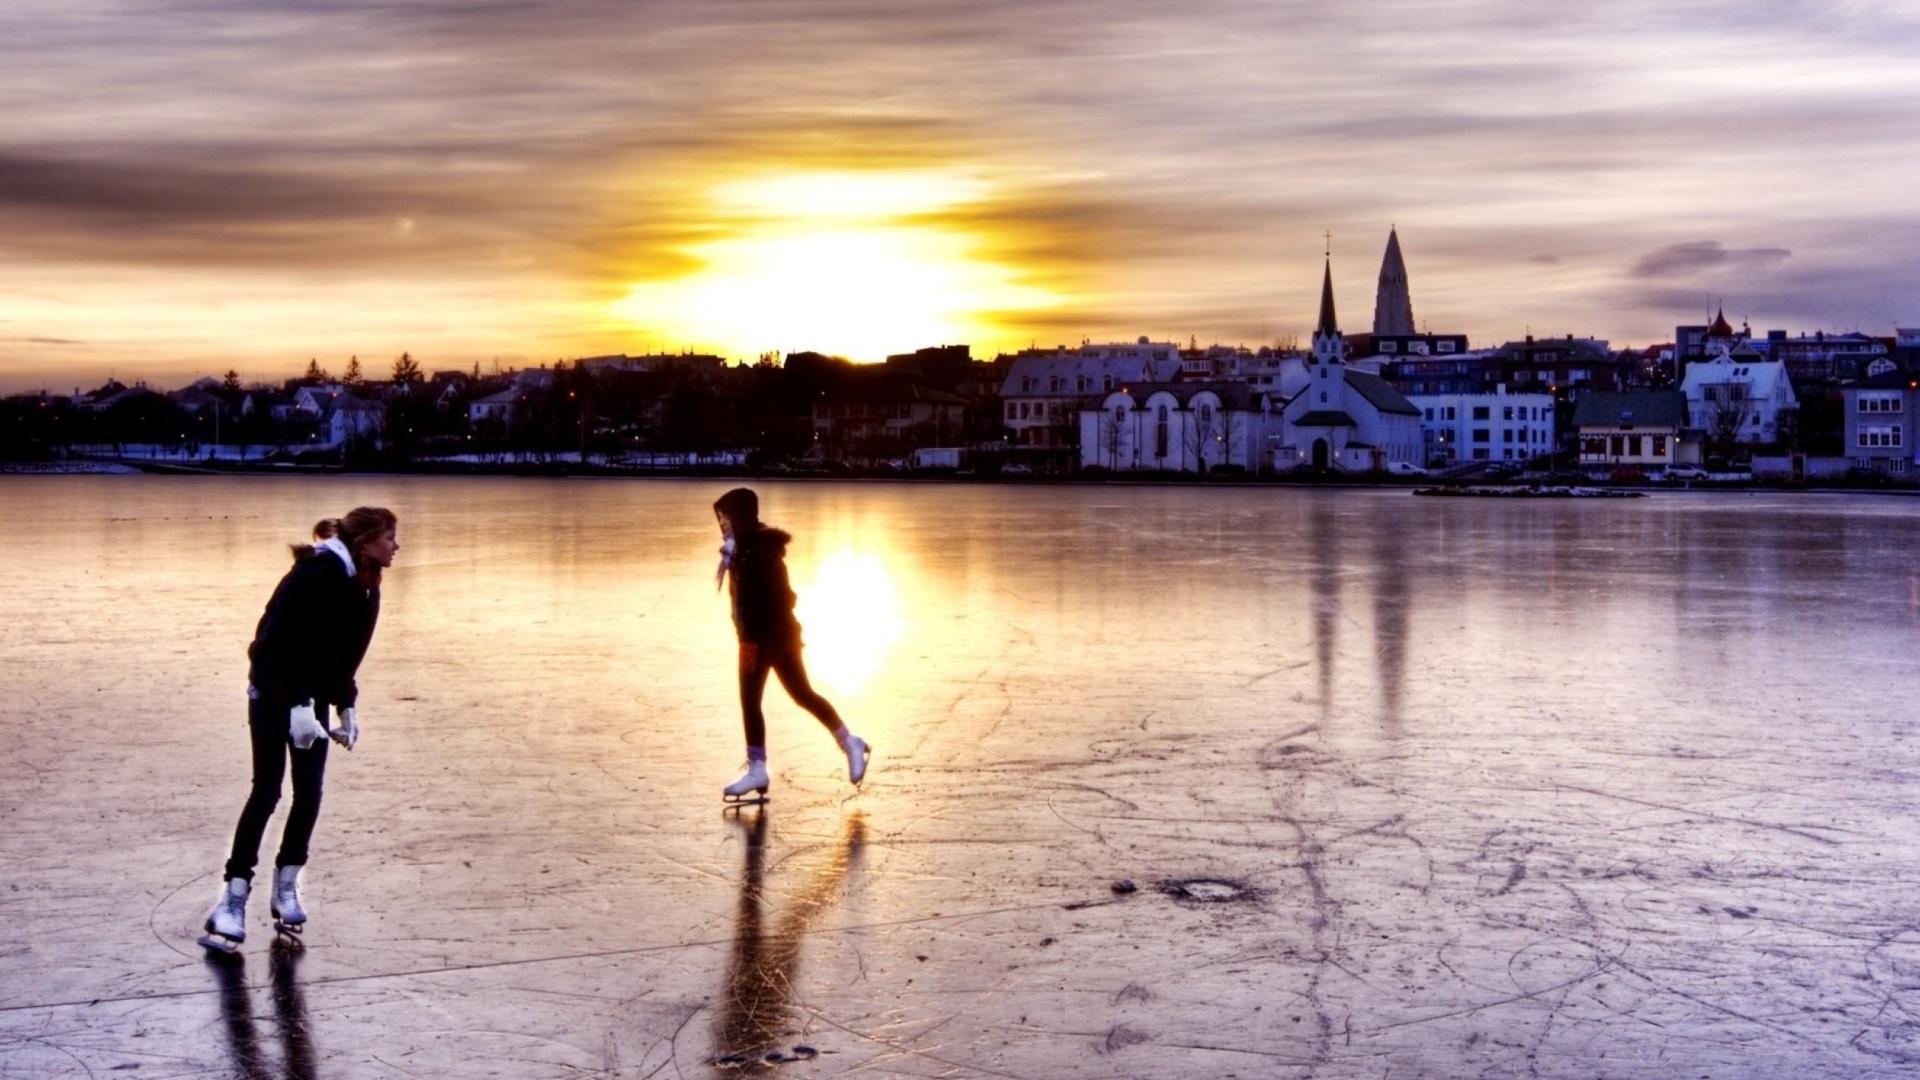 Ice Skating in Iceland wallpaper 1920x1080